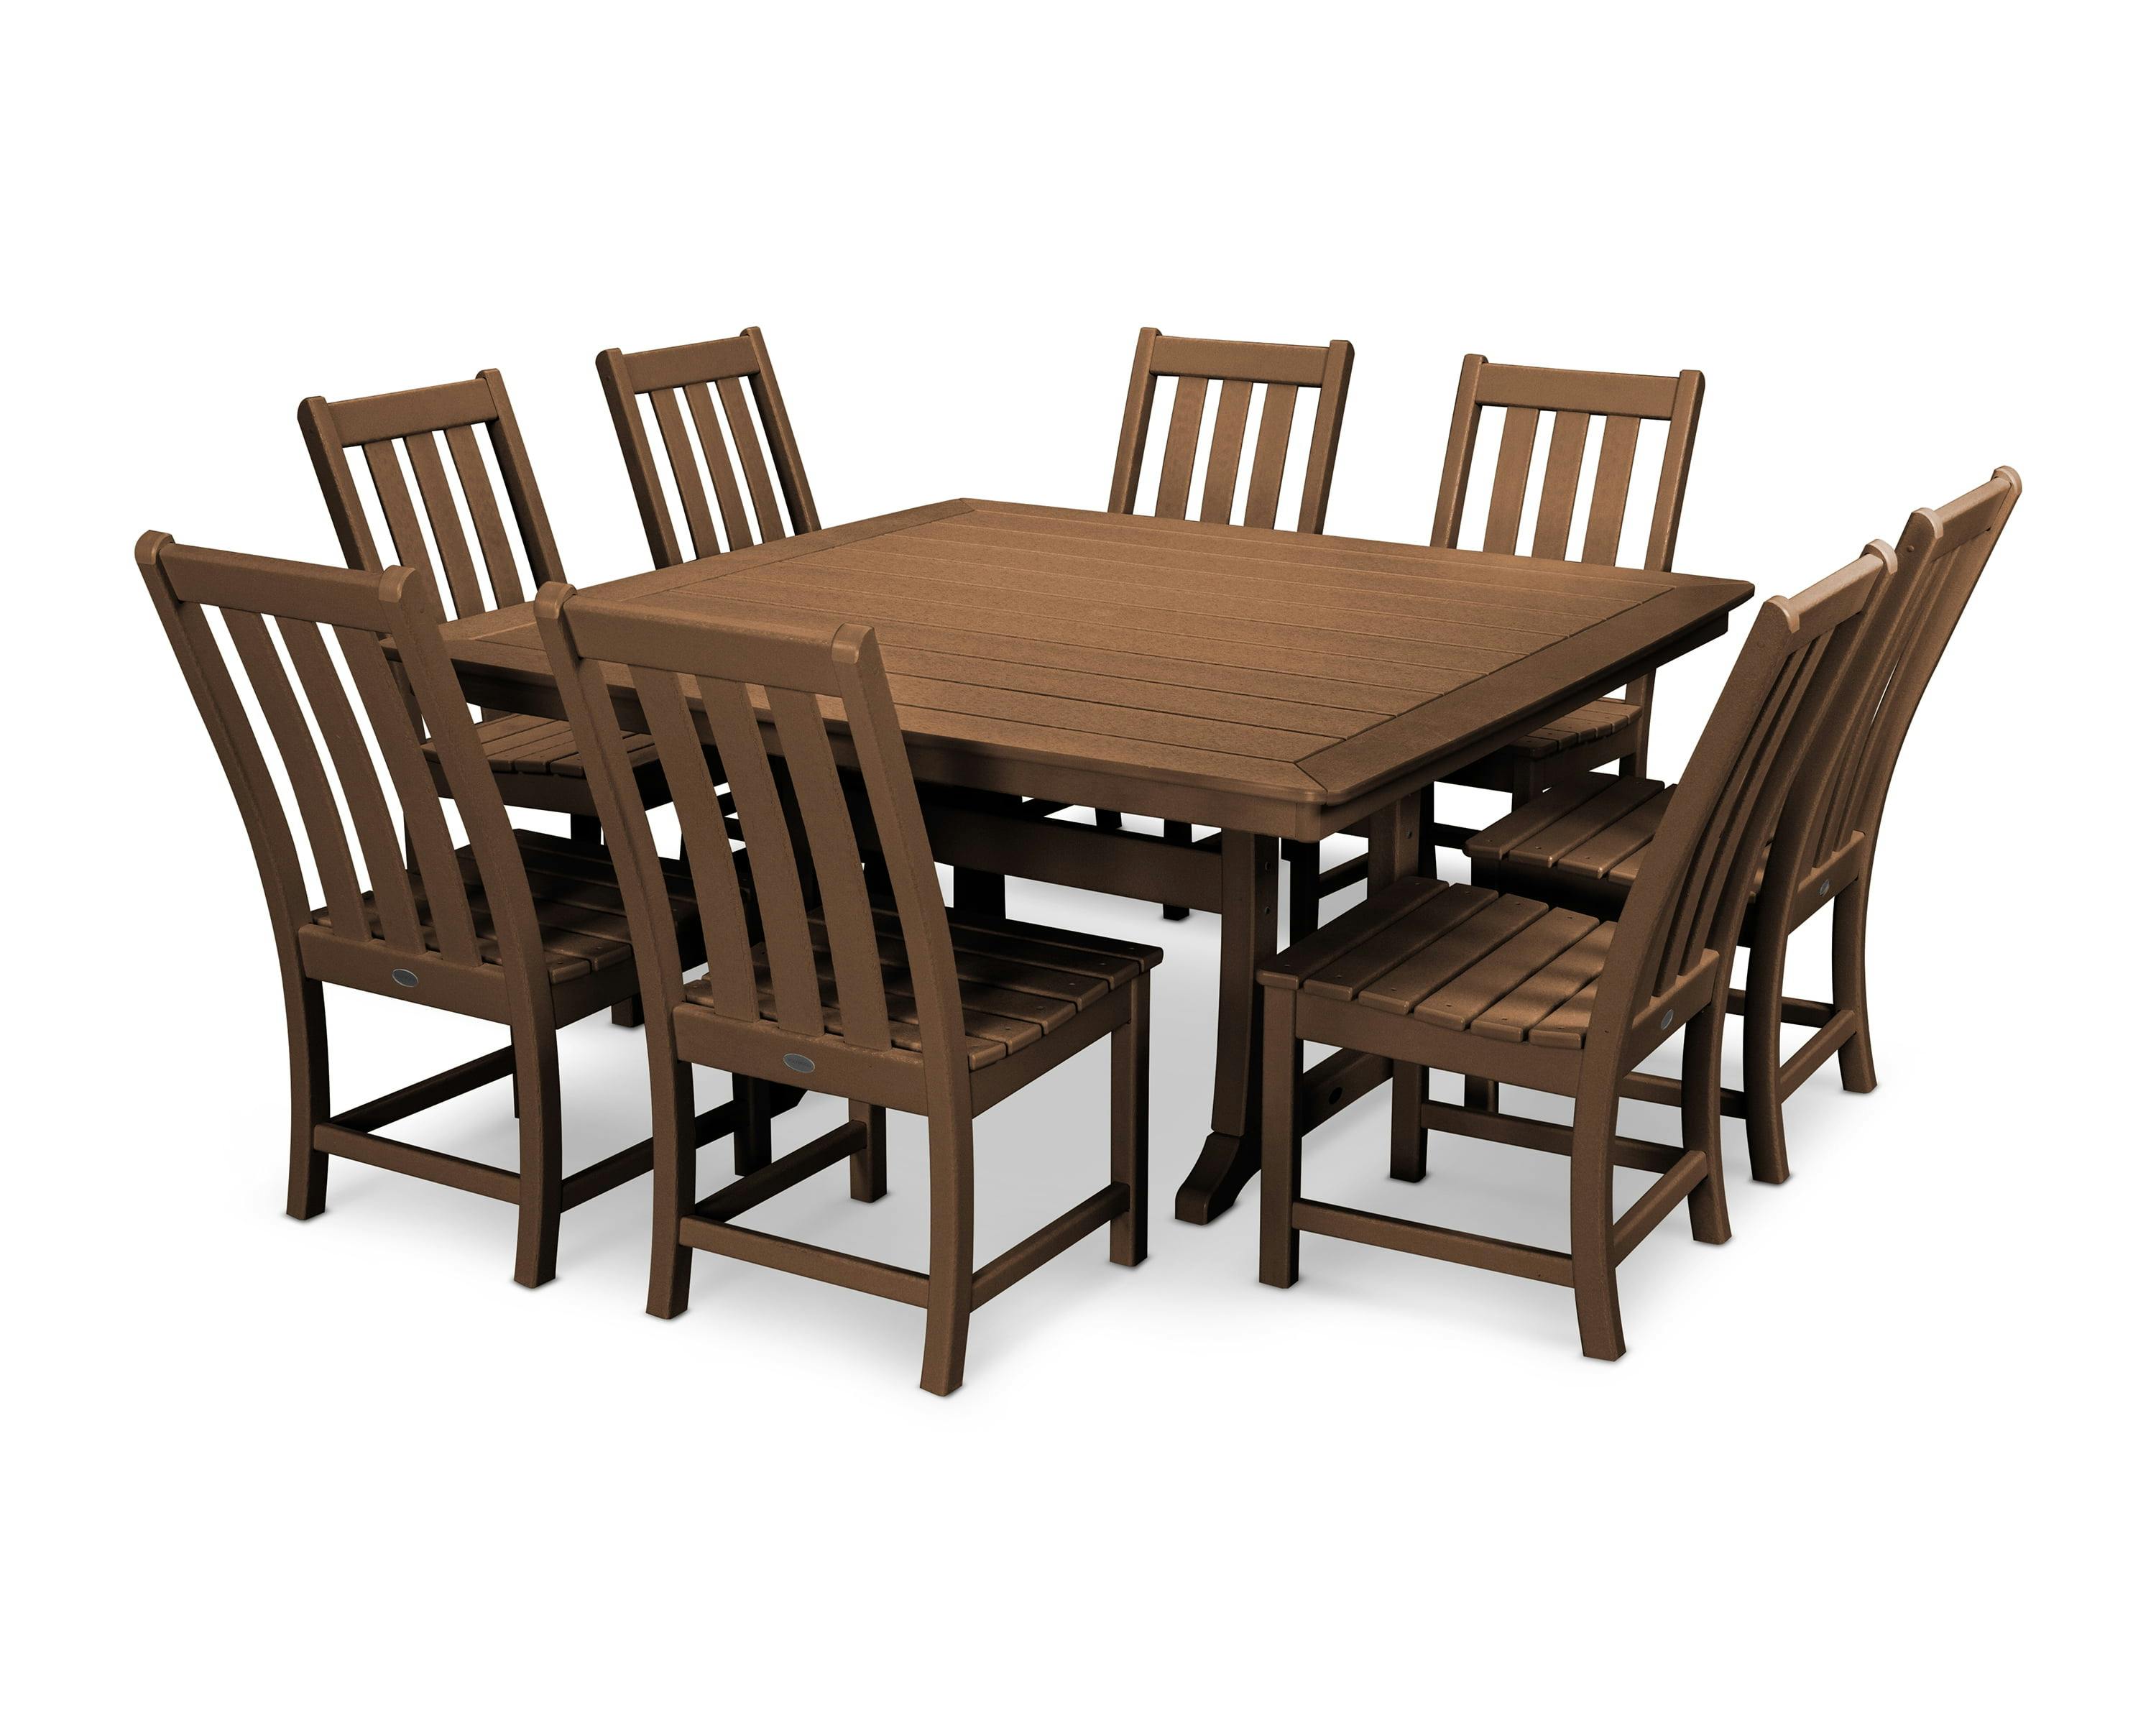 Vineyard 9-Piece Teak Outdoor Dining Set for Eight with Contoured Seats